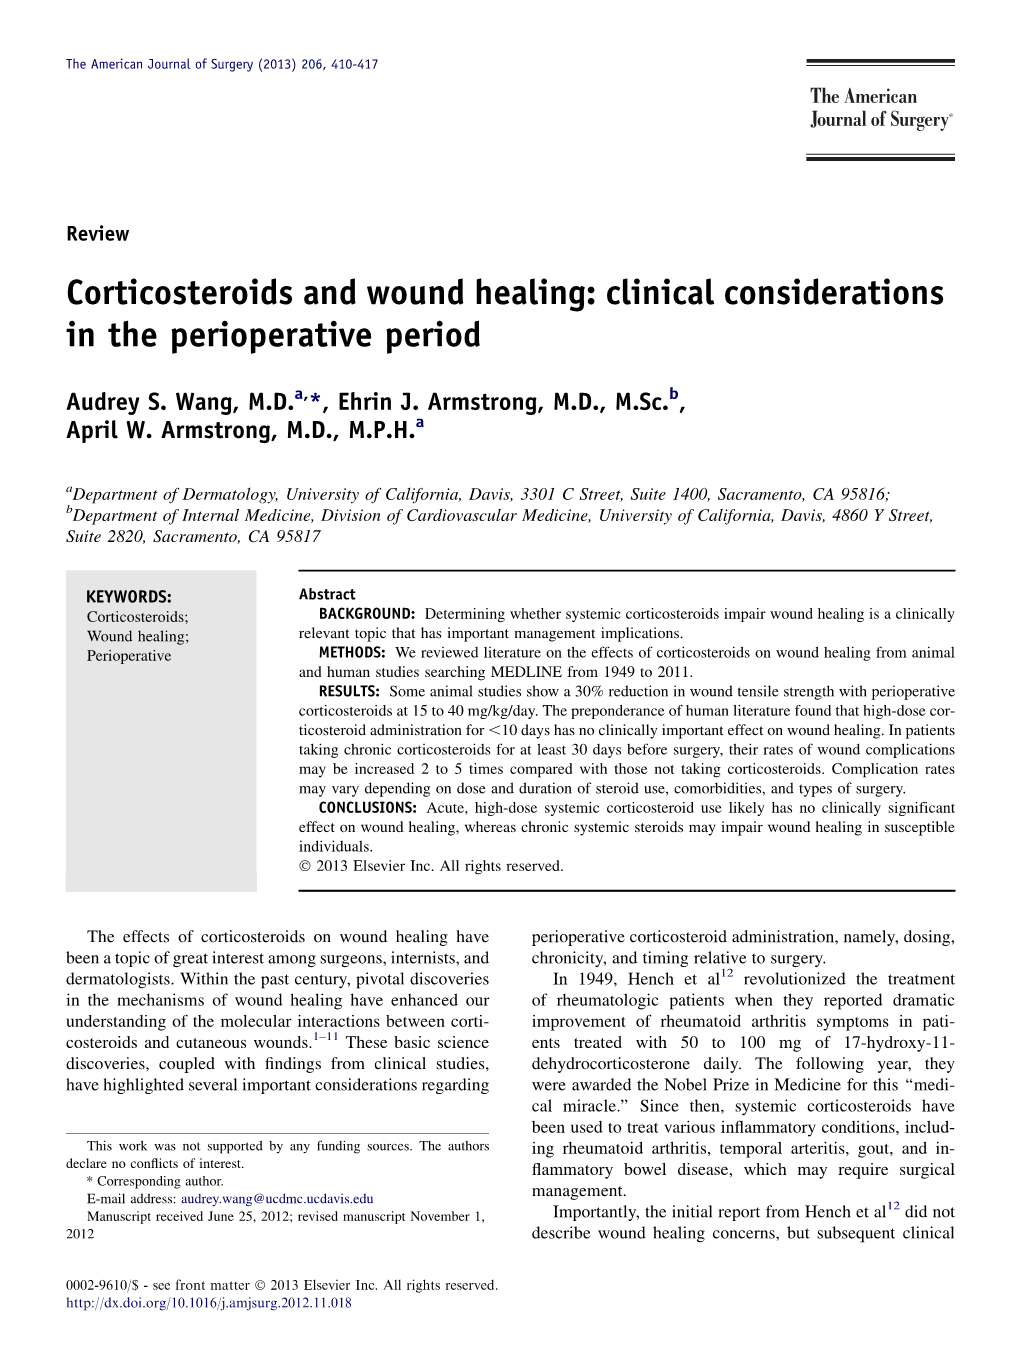 Corticosteroids and Wound Healing: Clinical Considerations in the Perioperative Period